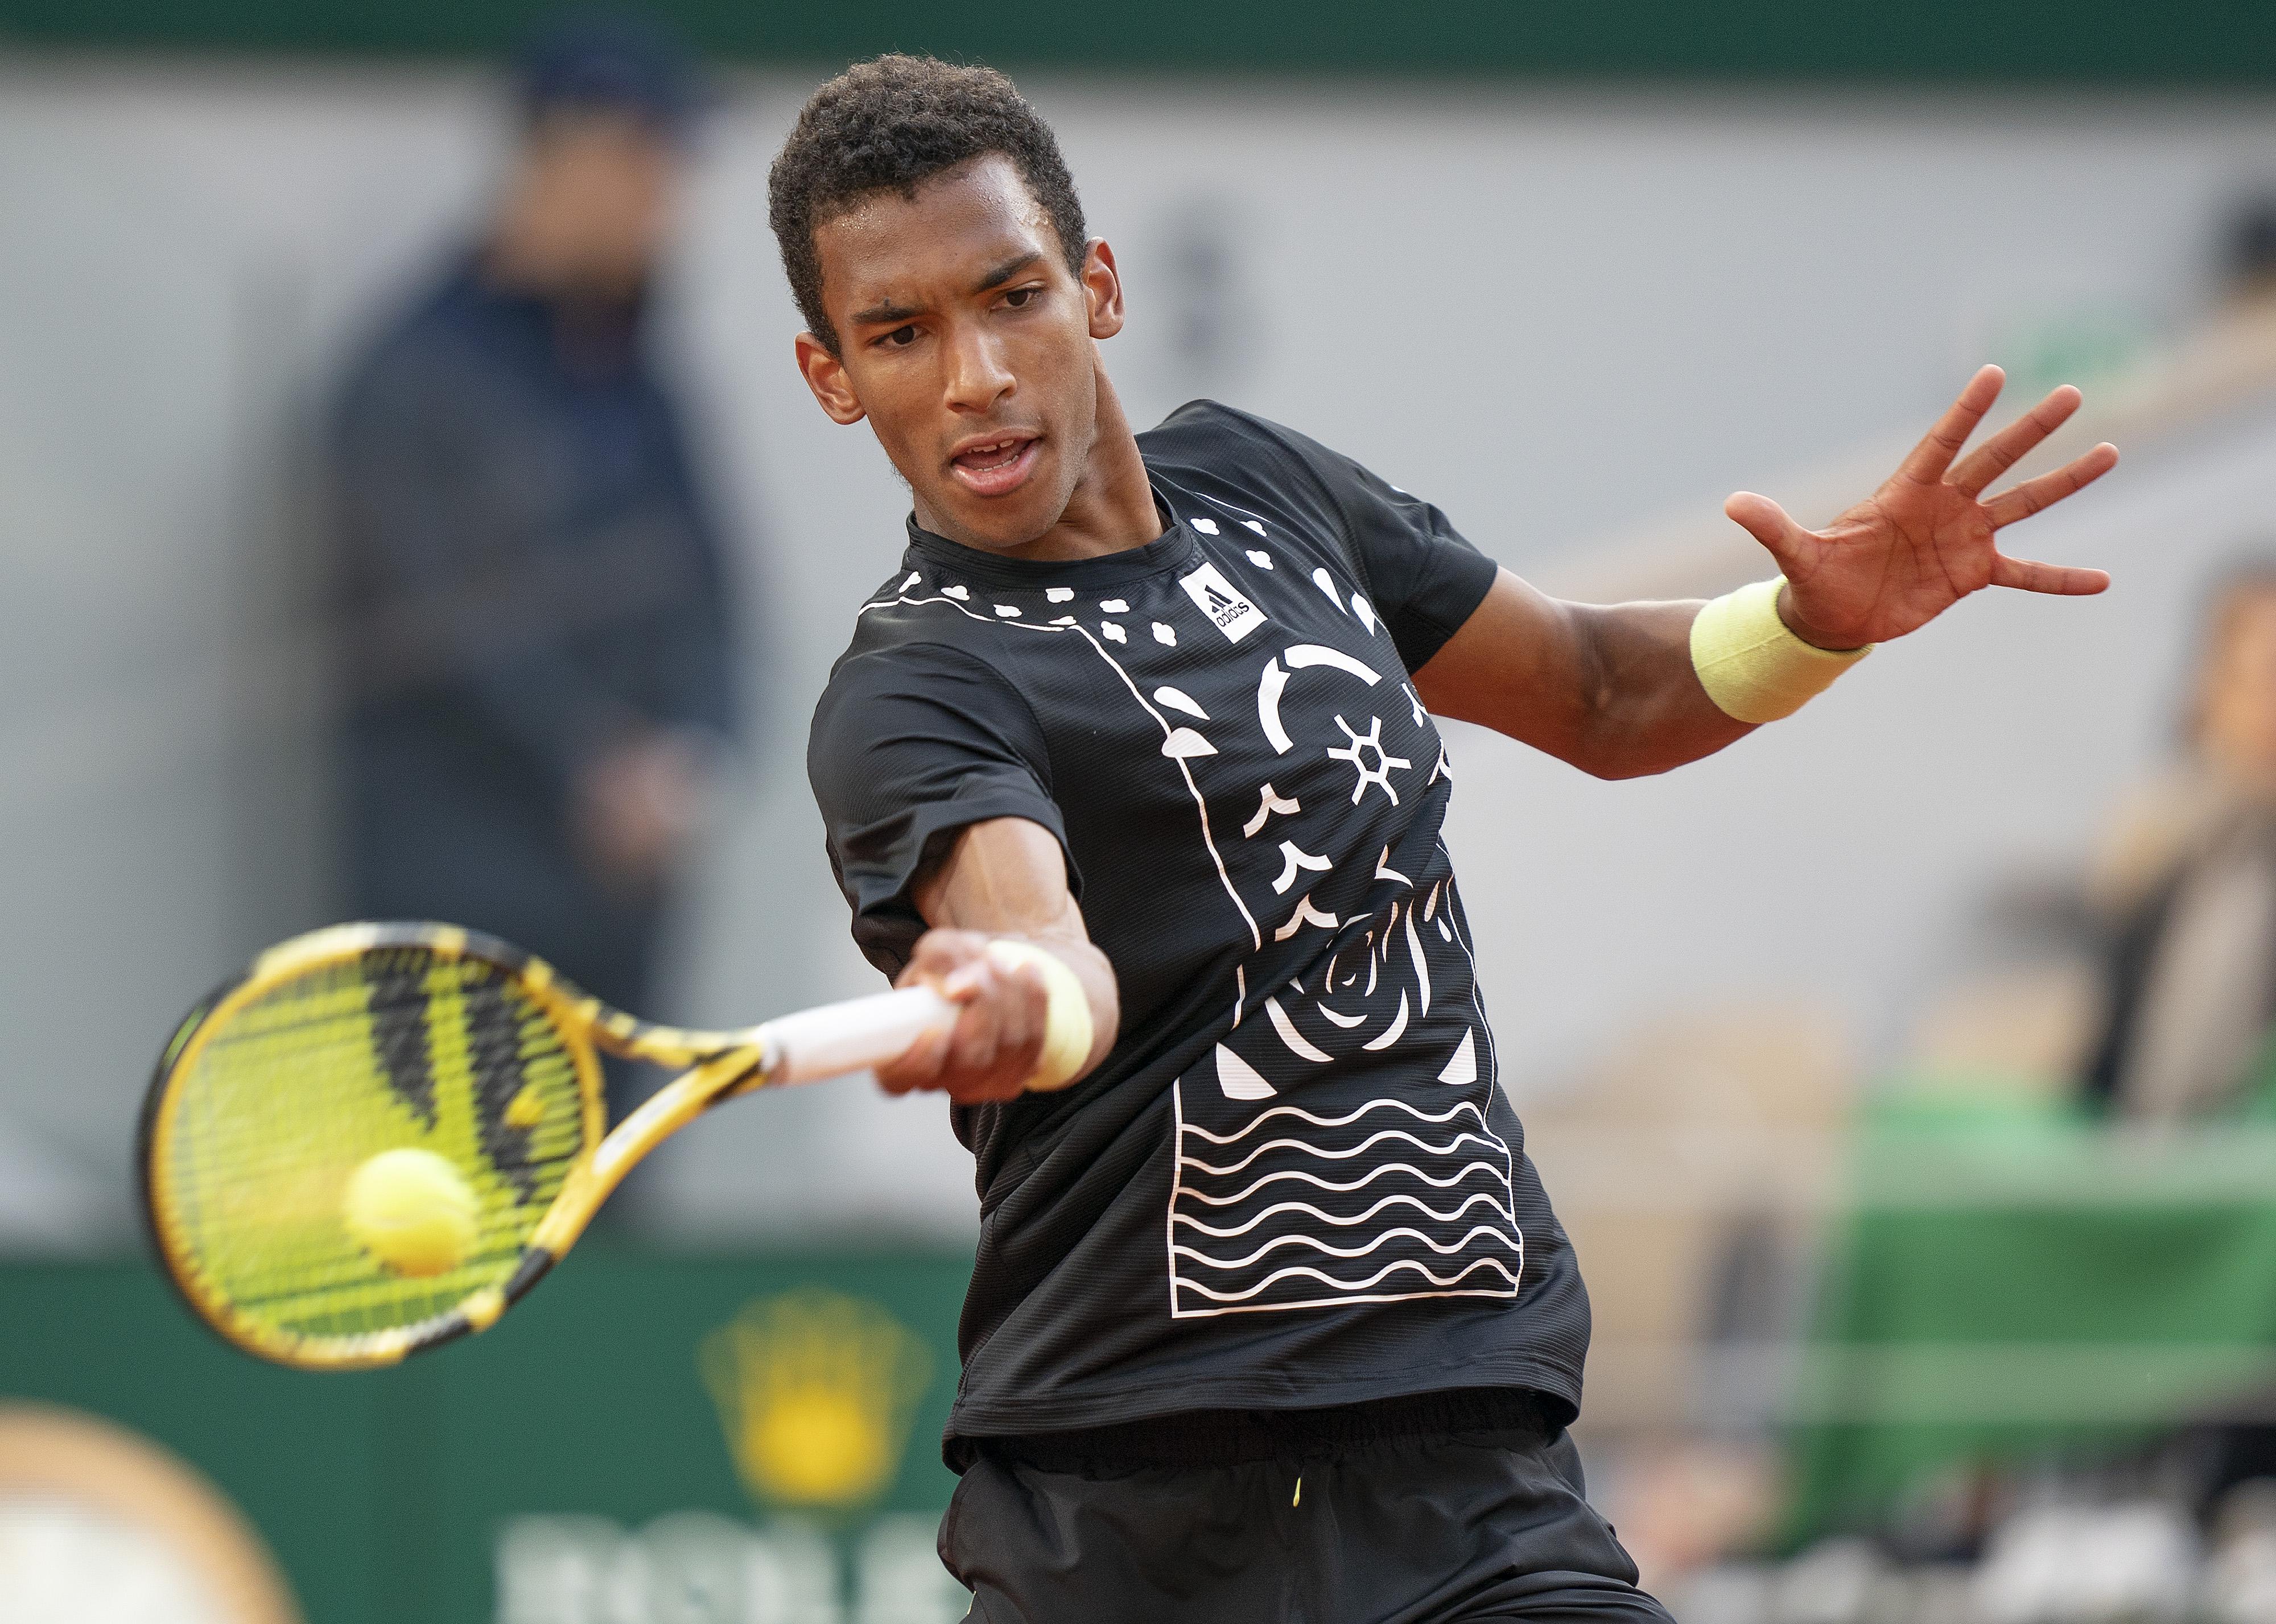 Felix Auger-Aliassime vs Maxime Cressy Odds, Prediction and Betting Trends for 2022 Wimbledon Men's Round 1 Match